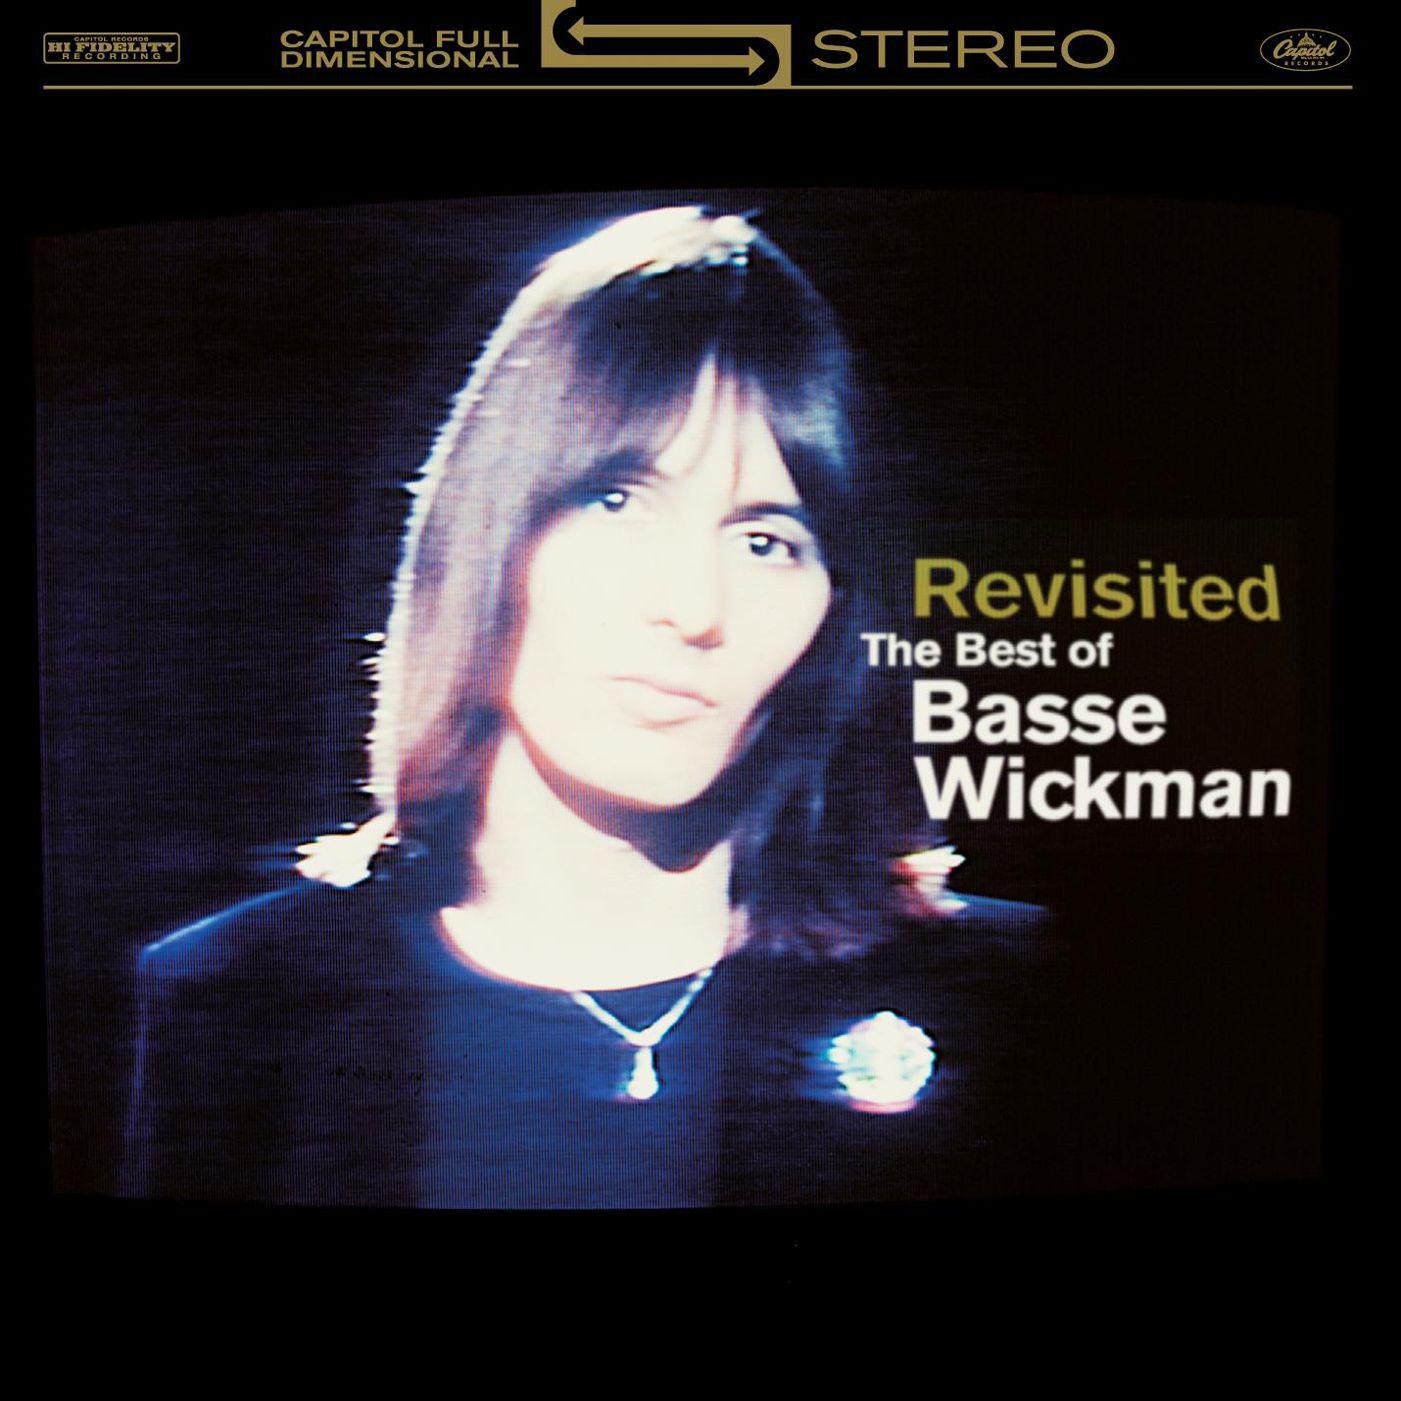 Basse Wickman - Anyday Woman (2005 Remaster)